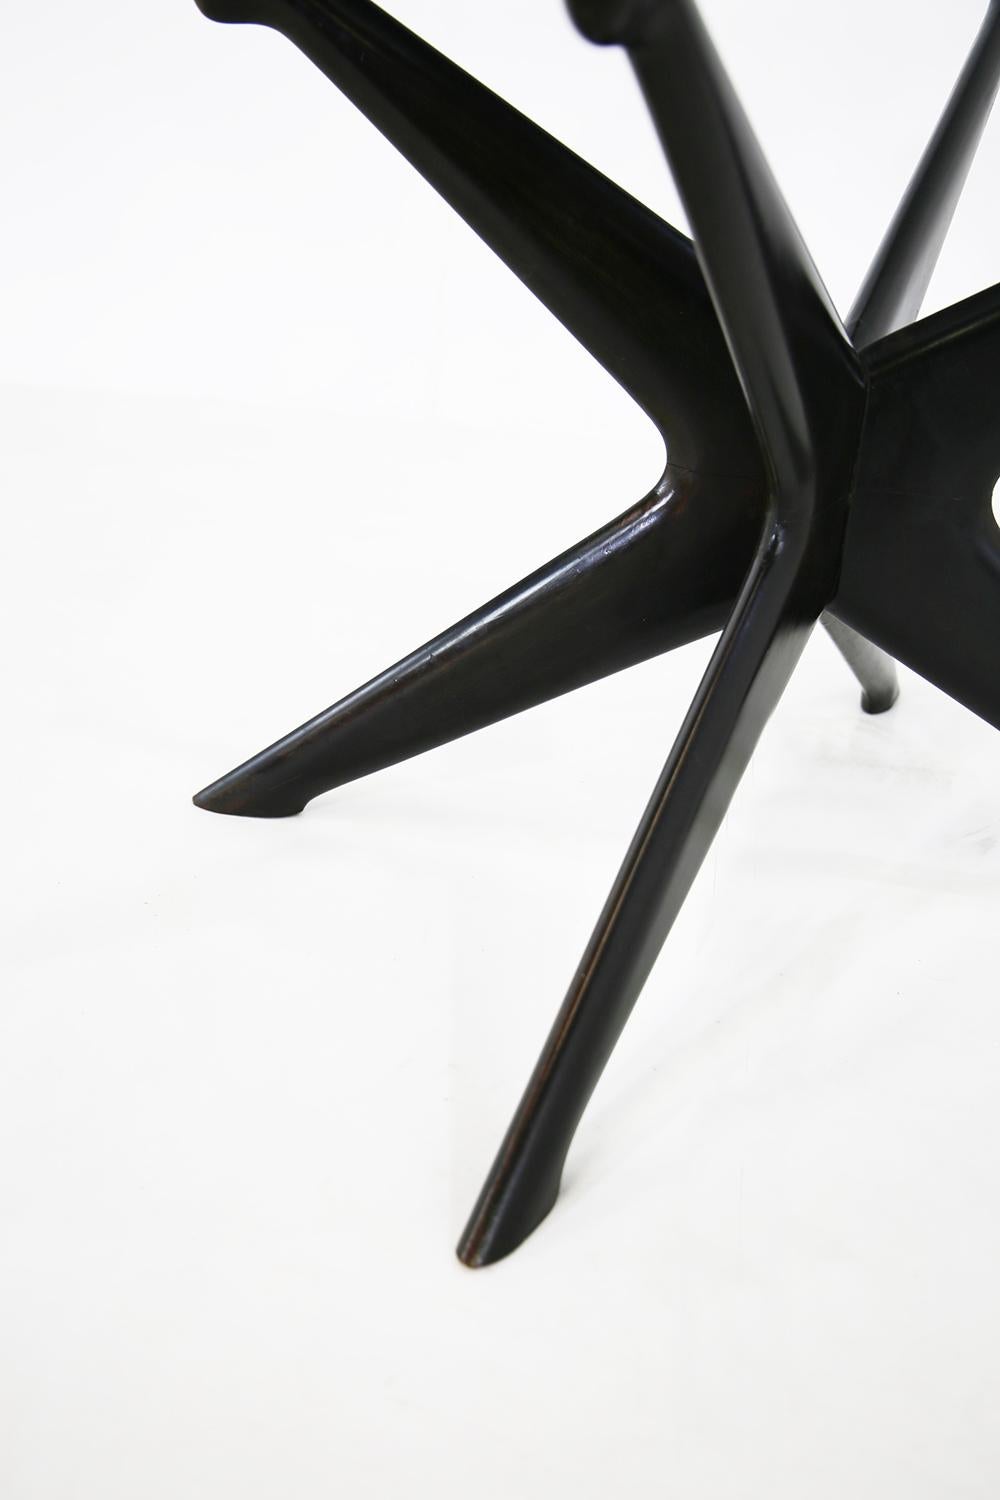 Wood Mid-Century Modern Occasional Table Designed by Ico Parisi